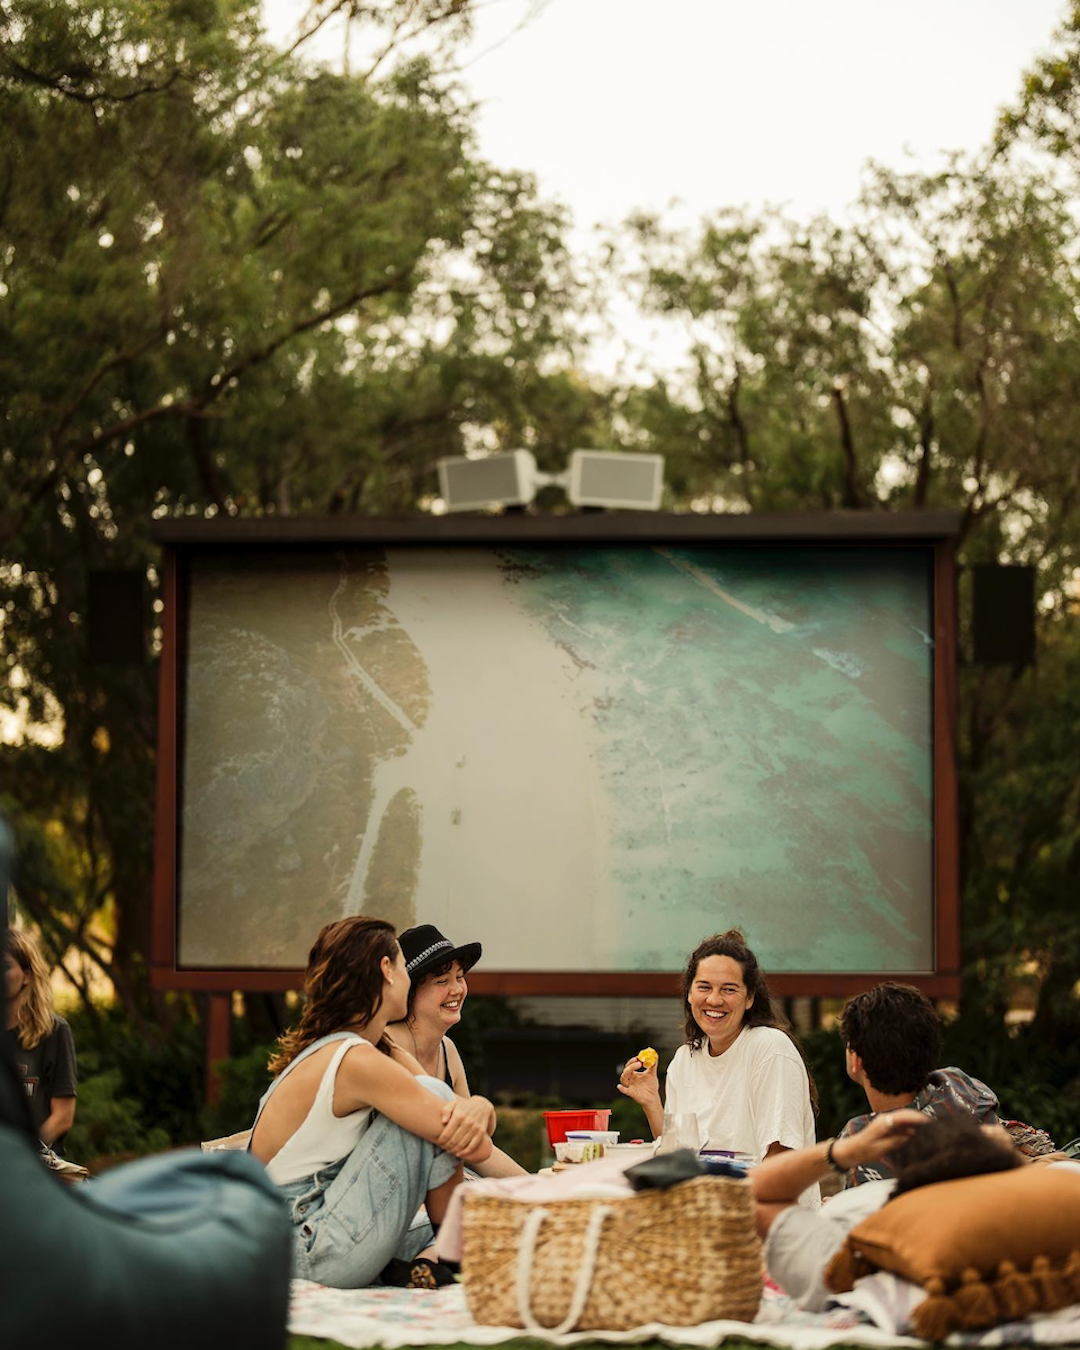 A group of people enjoying an outdoor picnic and outdoor movie at Cape Mentelle winery in Margaret River